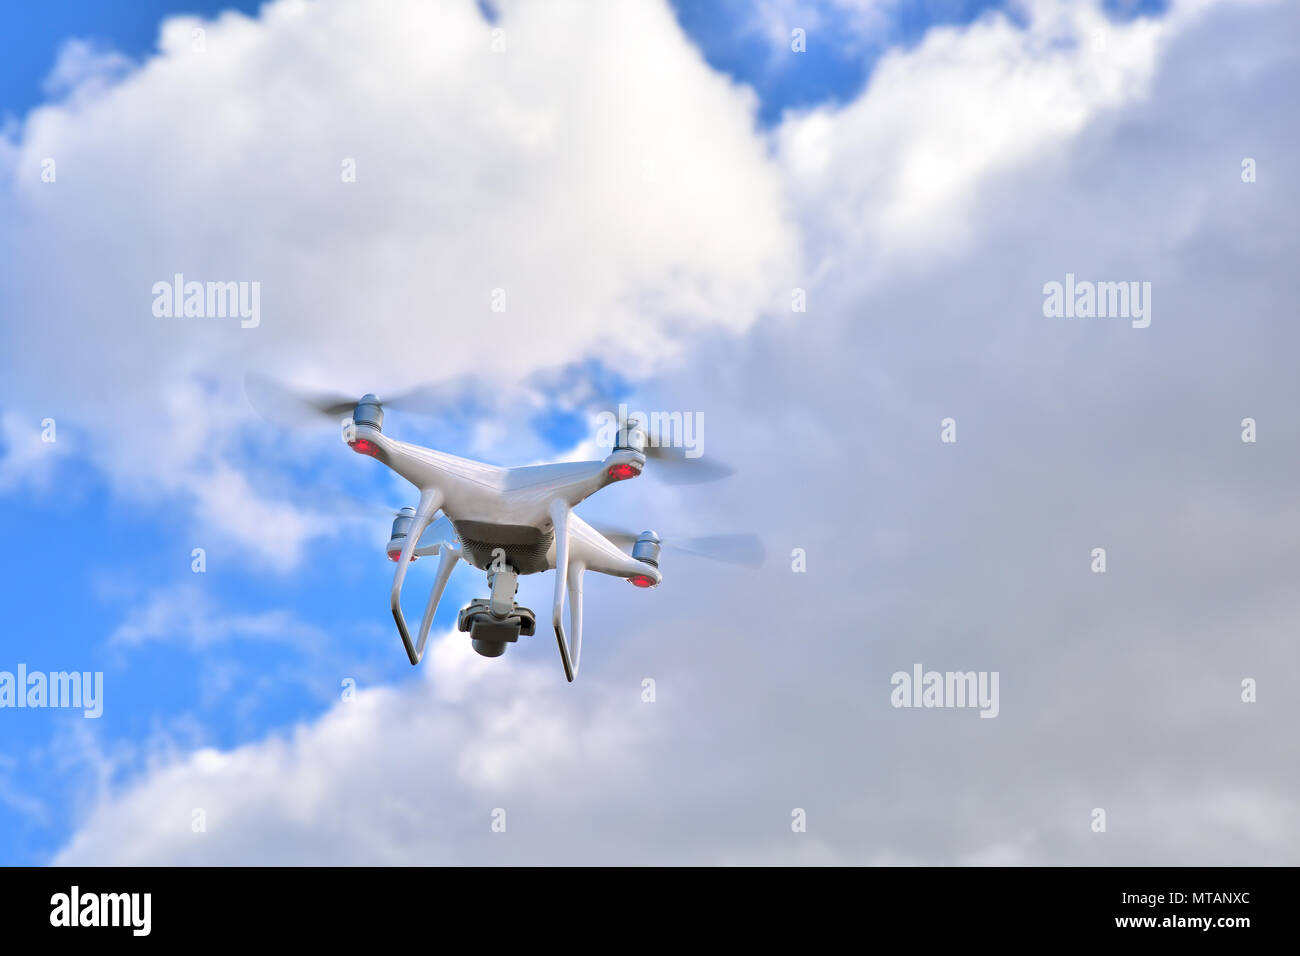 Professional drone with camera for photo and video recording flying with sky with clouds in the background Stock Photo